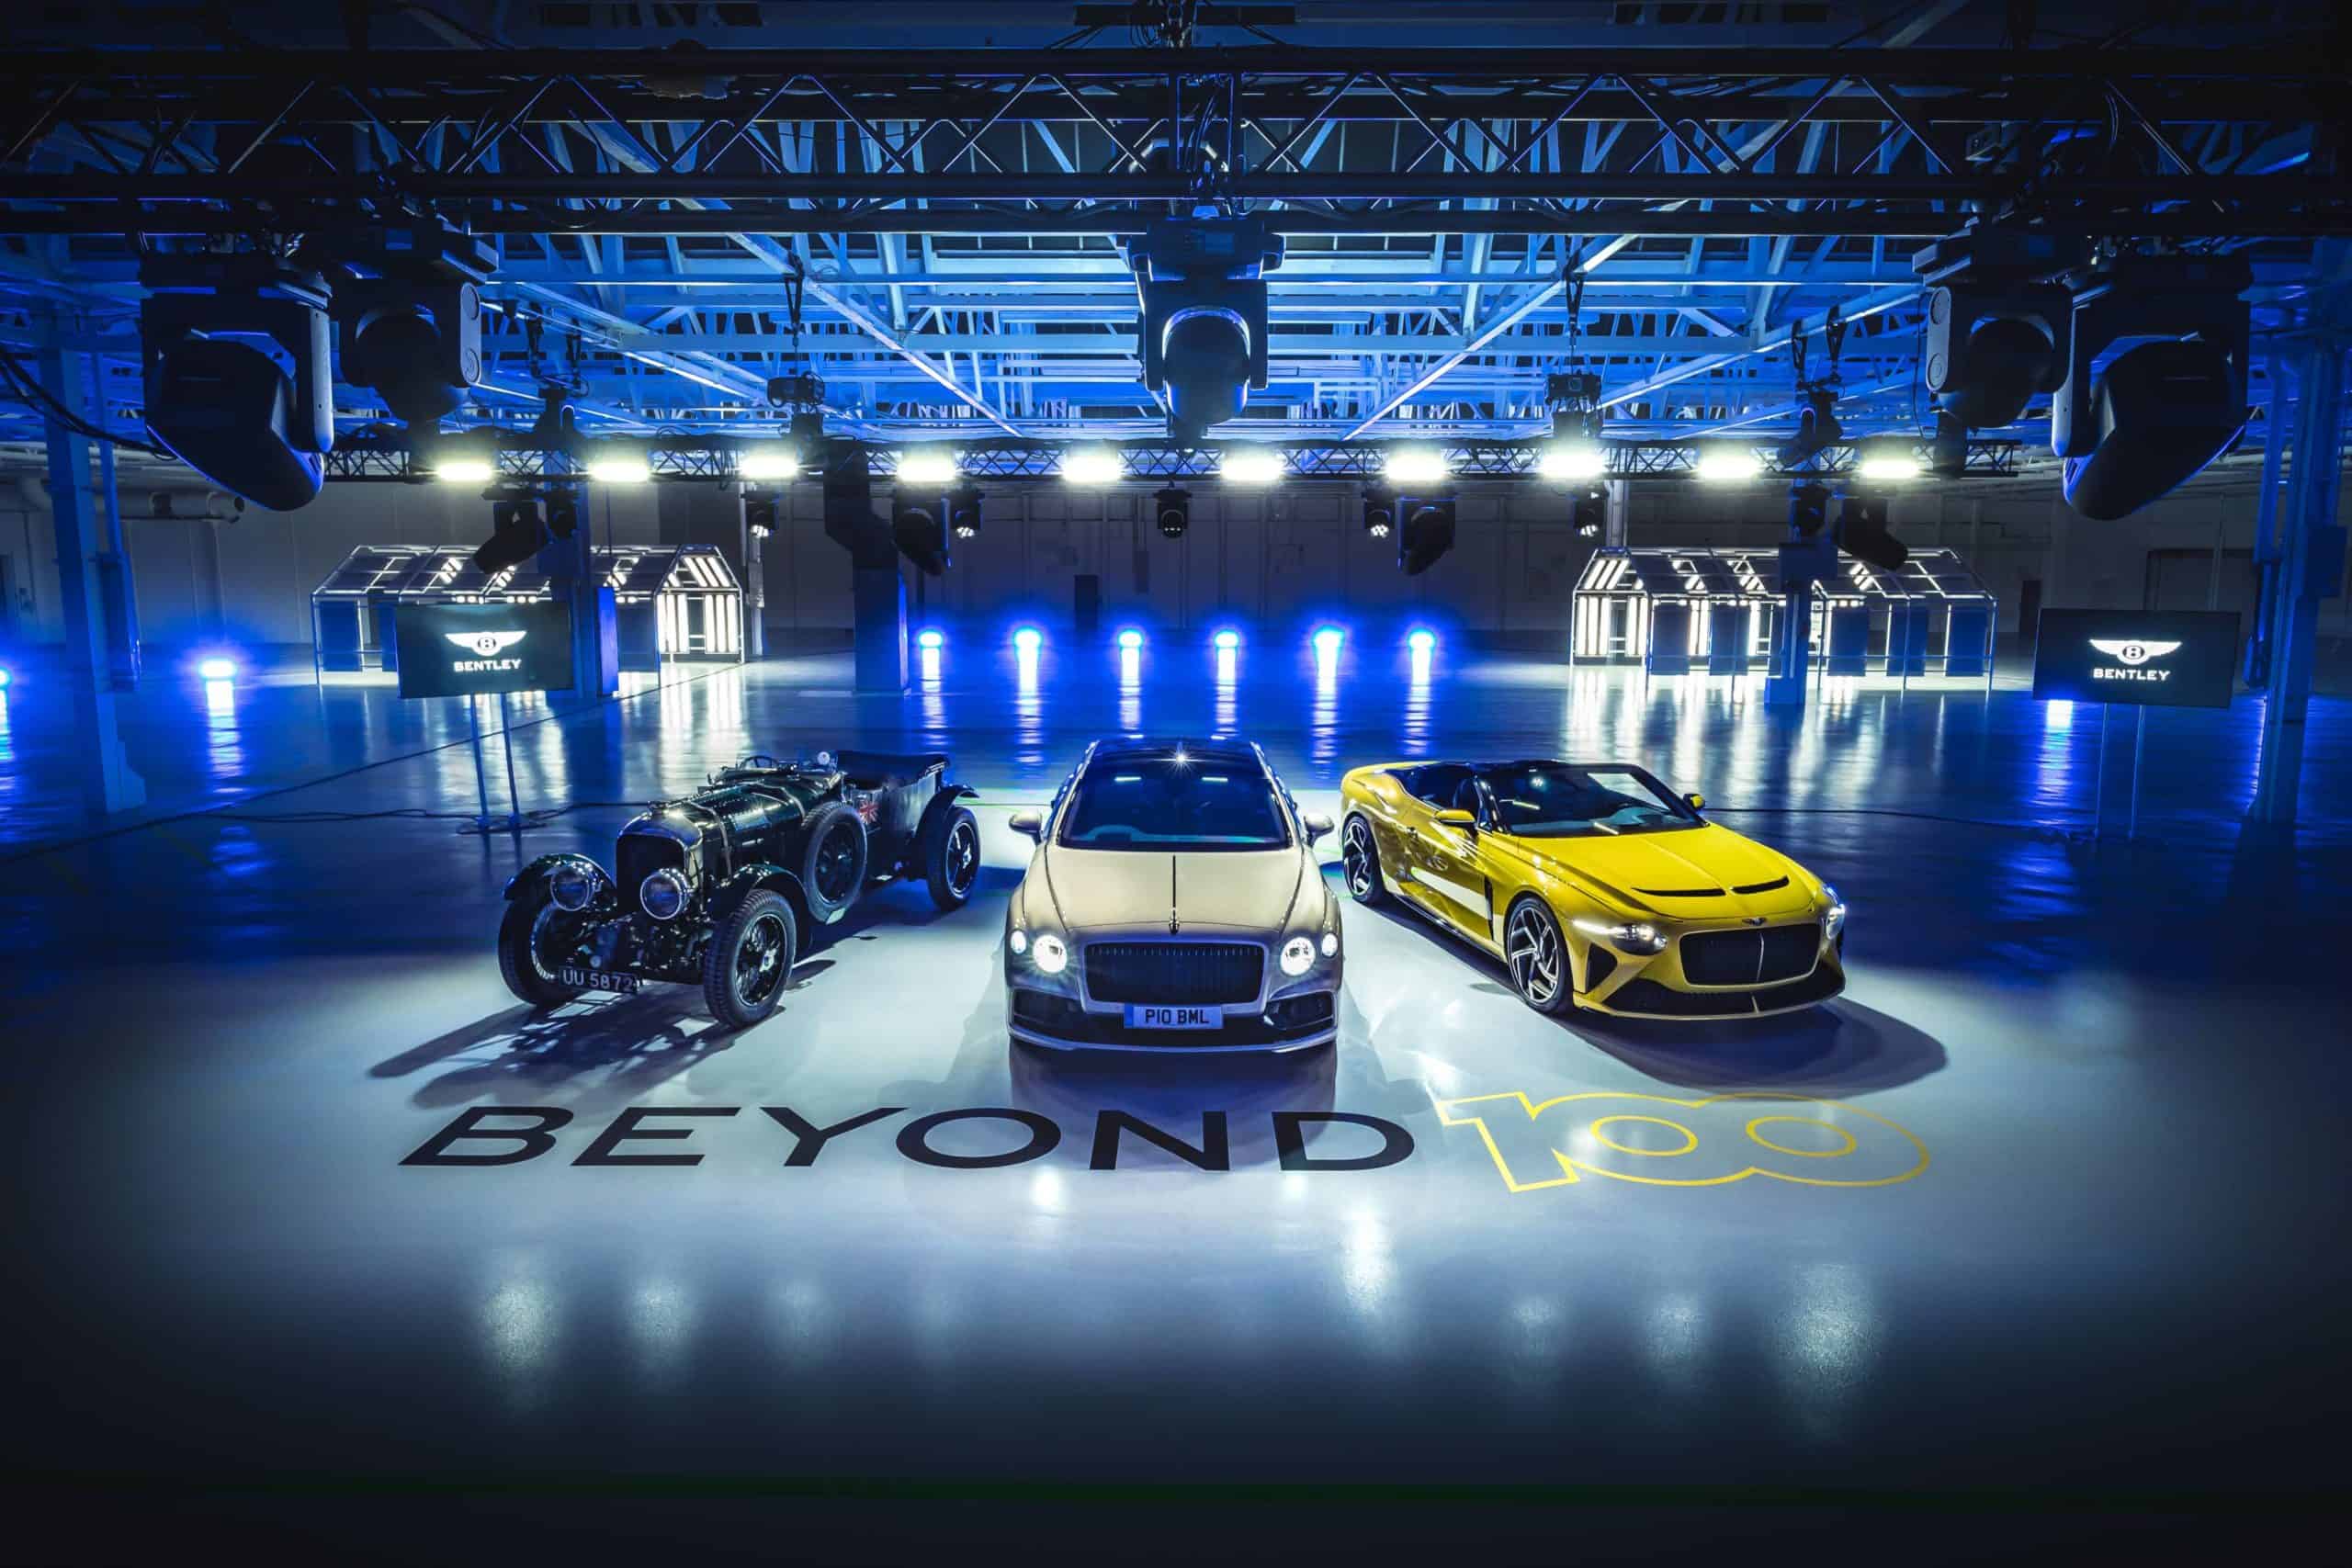 Bentley outlines their Beyond 100 strategy